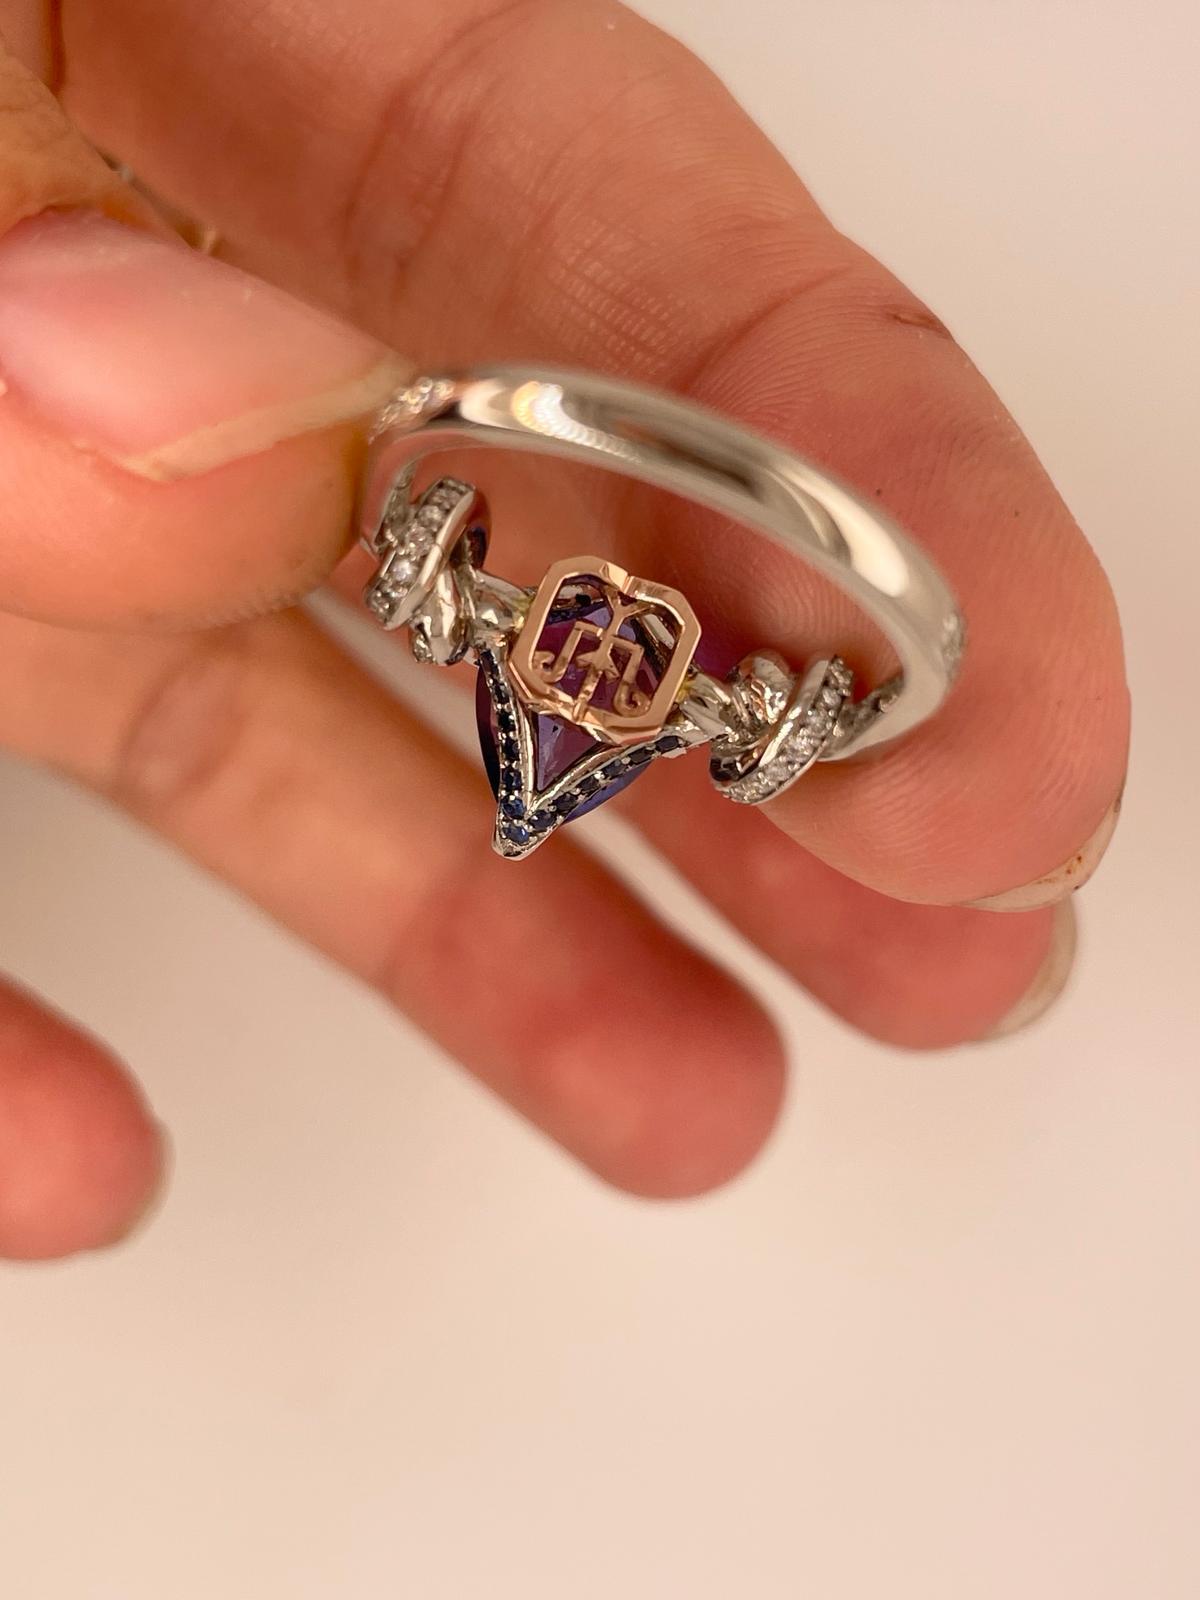 For Sale:  2ct tanzanite and diamond ring in platinum and rose gold  Forget me knot ring  16